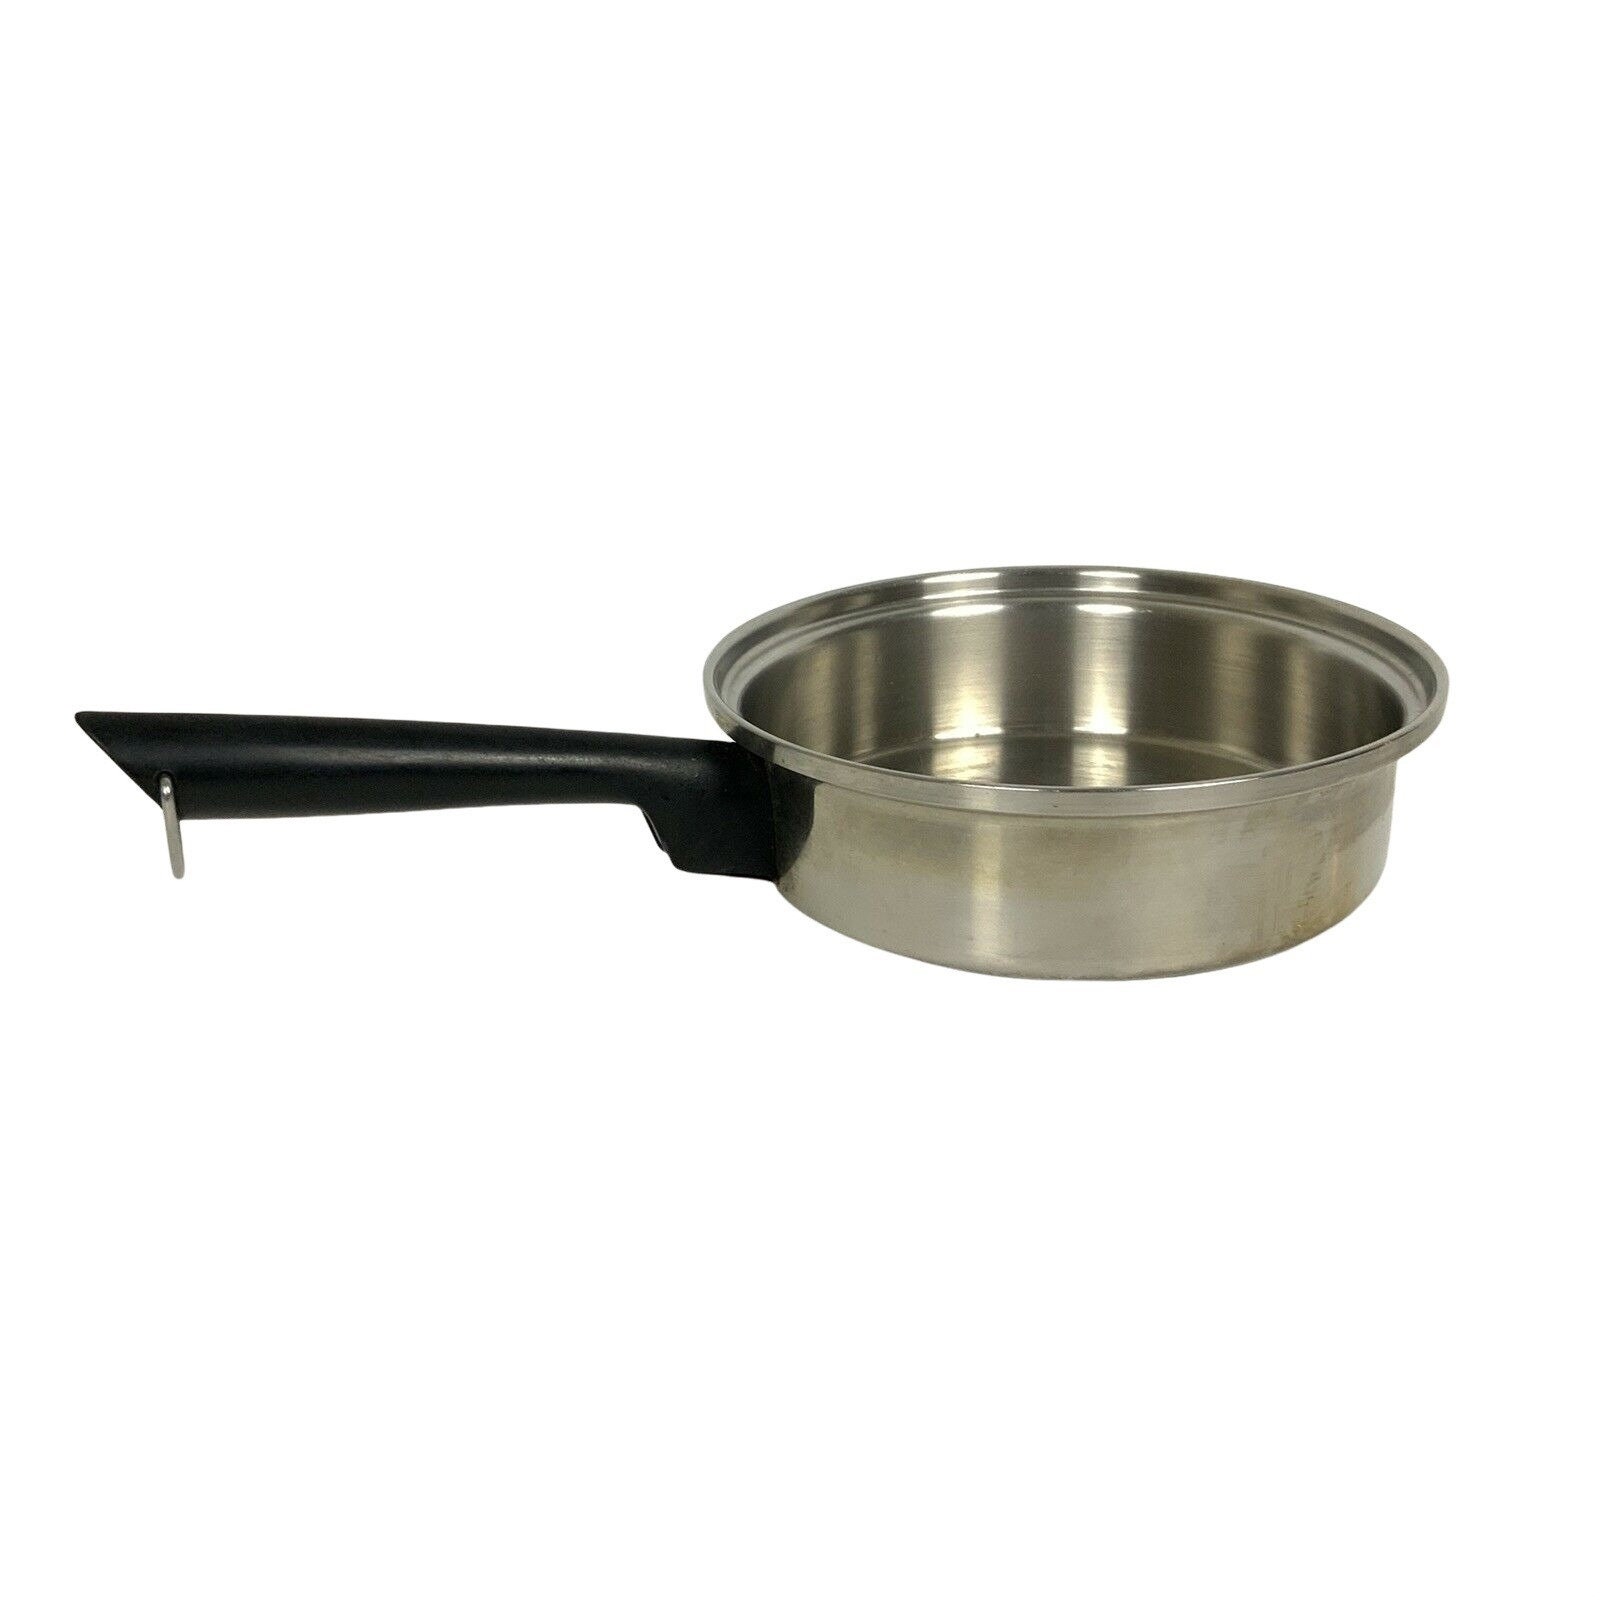 Forever Ware 3 Ply 18 8 Stainless Steel Skillet Fry Pan NO LID 10.5 inch USA